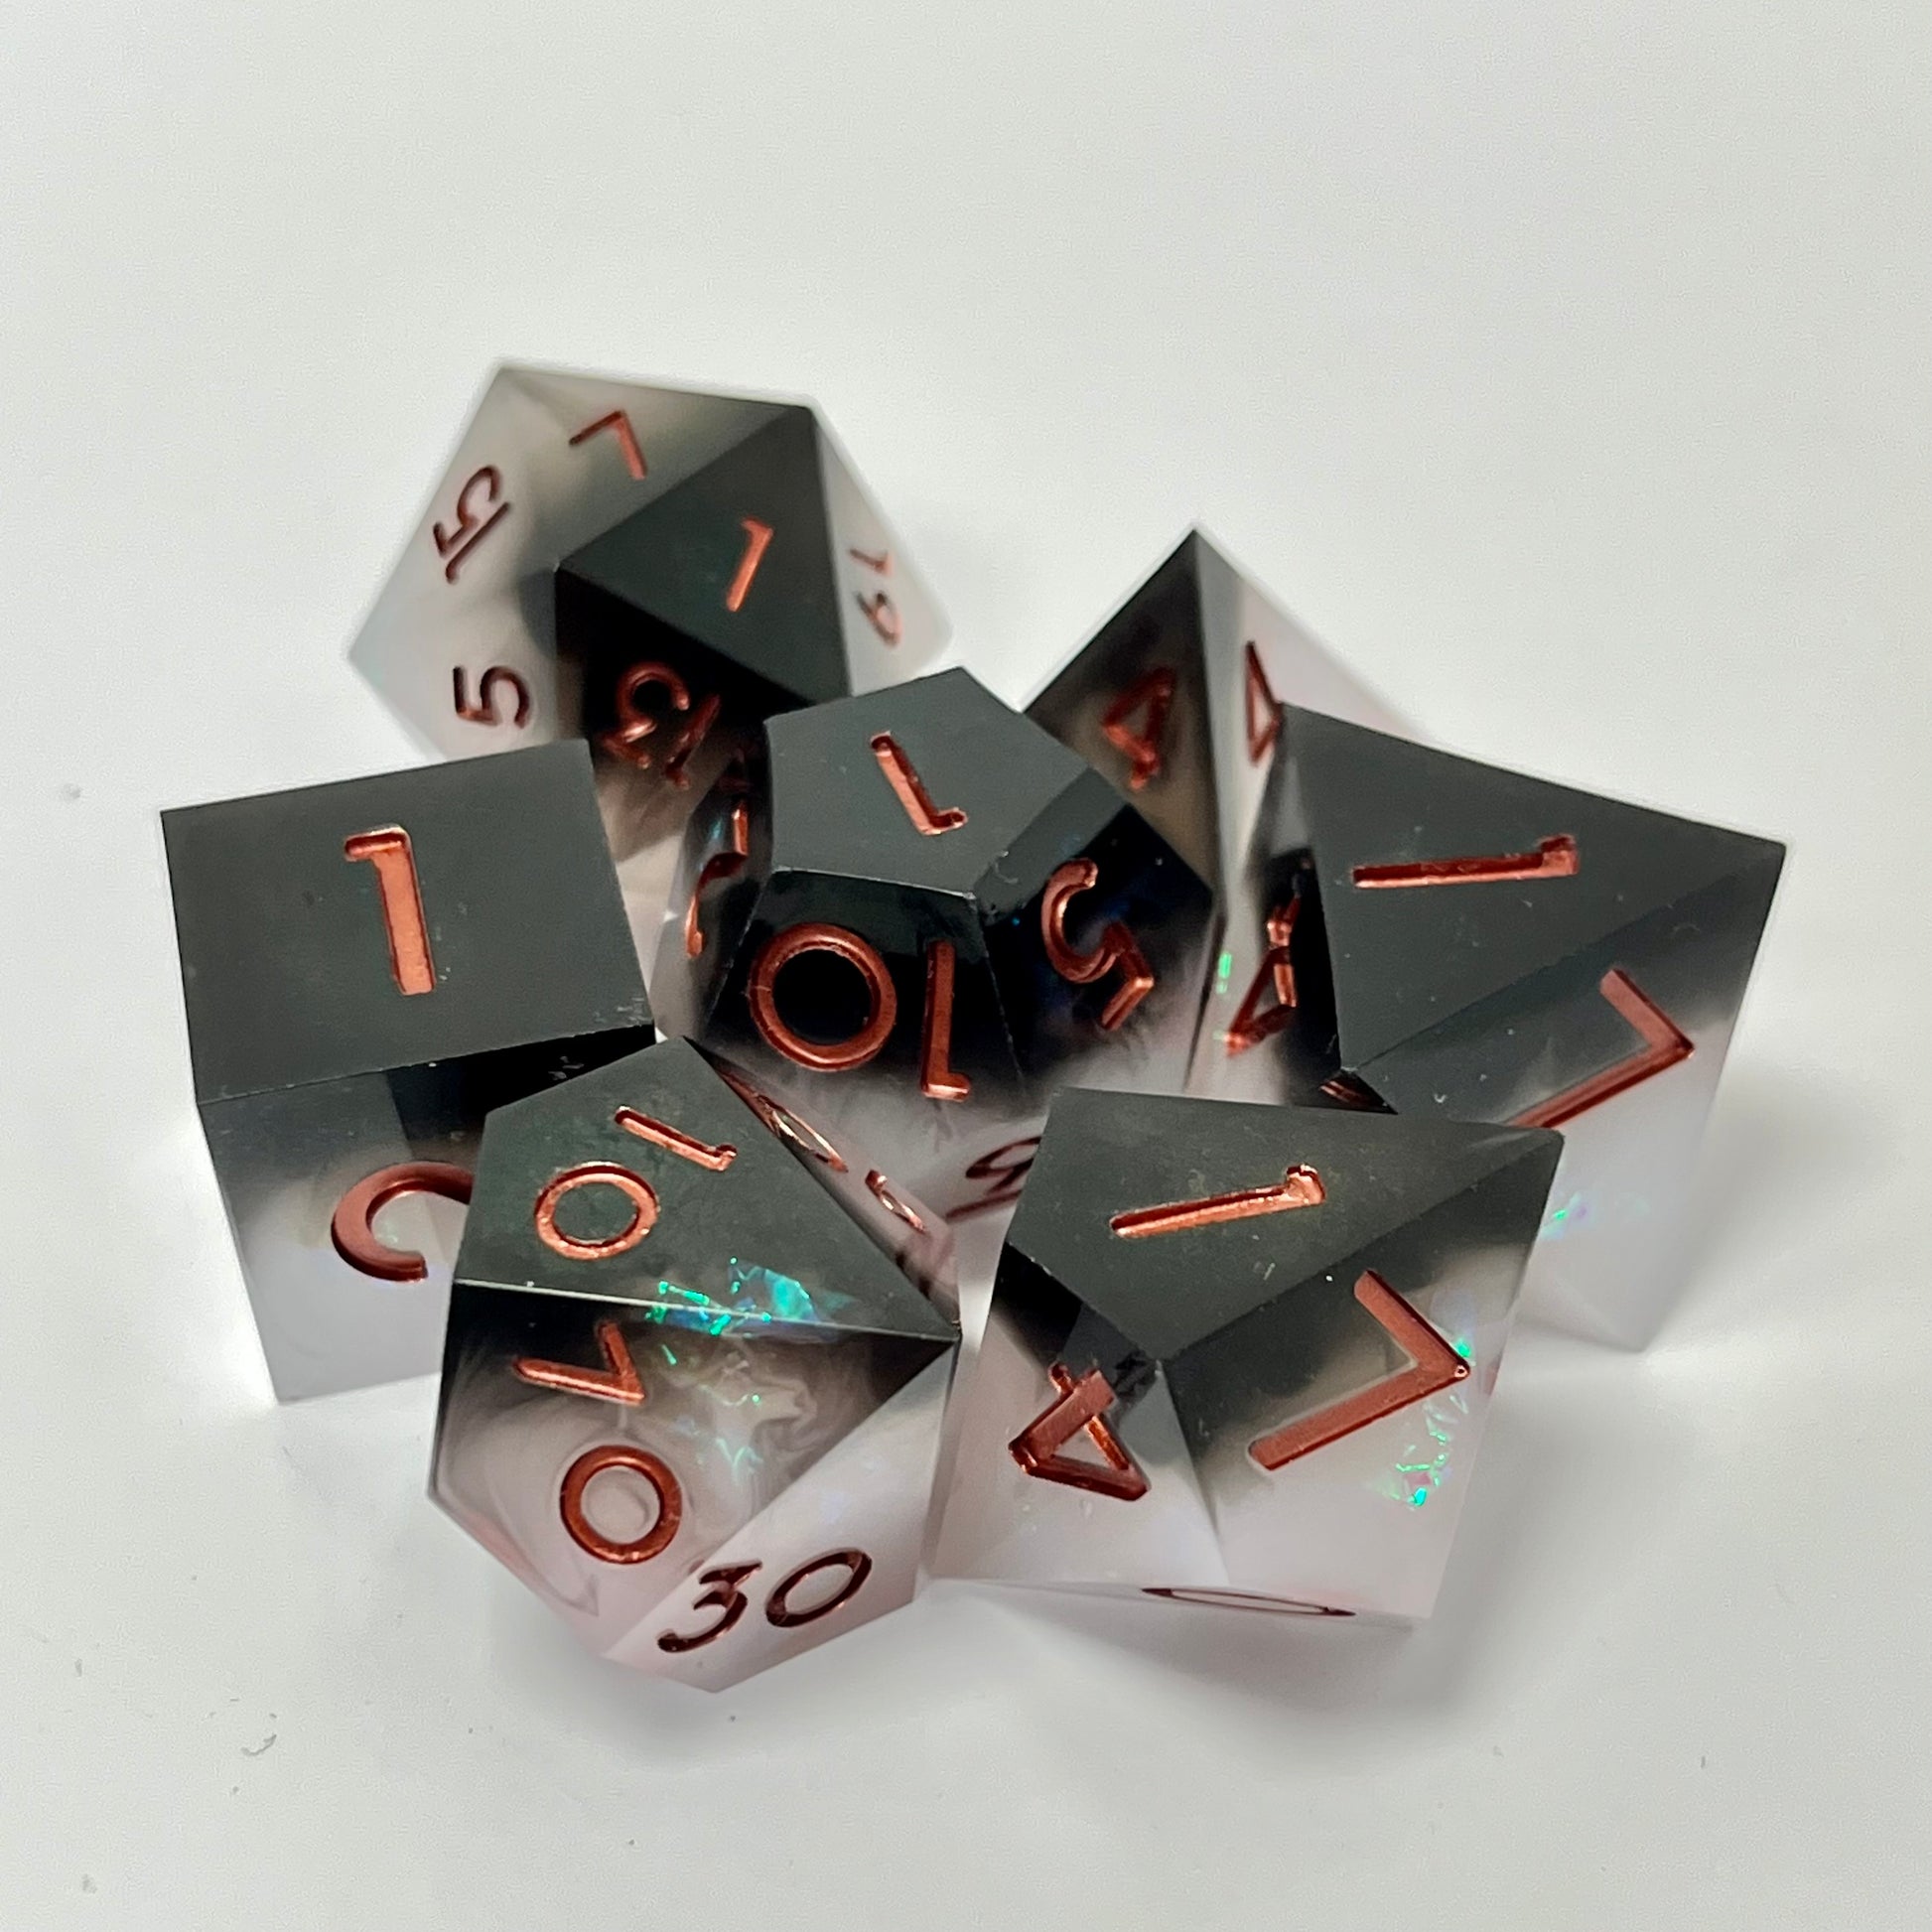 black and white sharp edge dnd dice sets, for TTRPG, RPG role playing games and dice goblin collectors